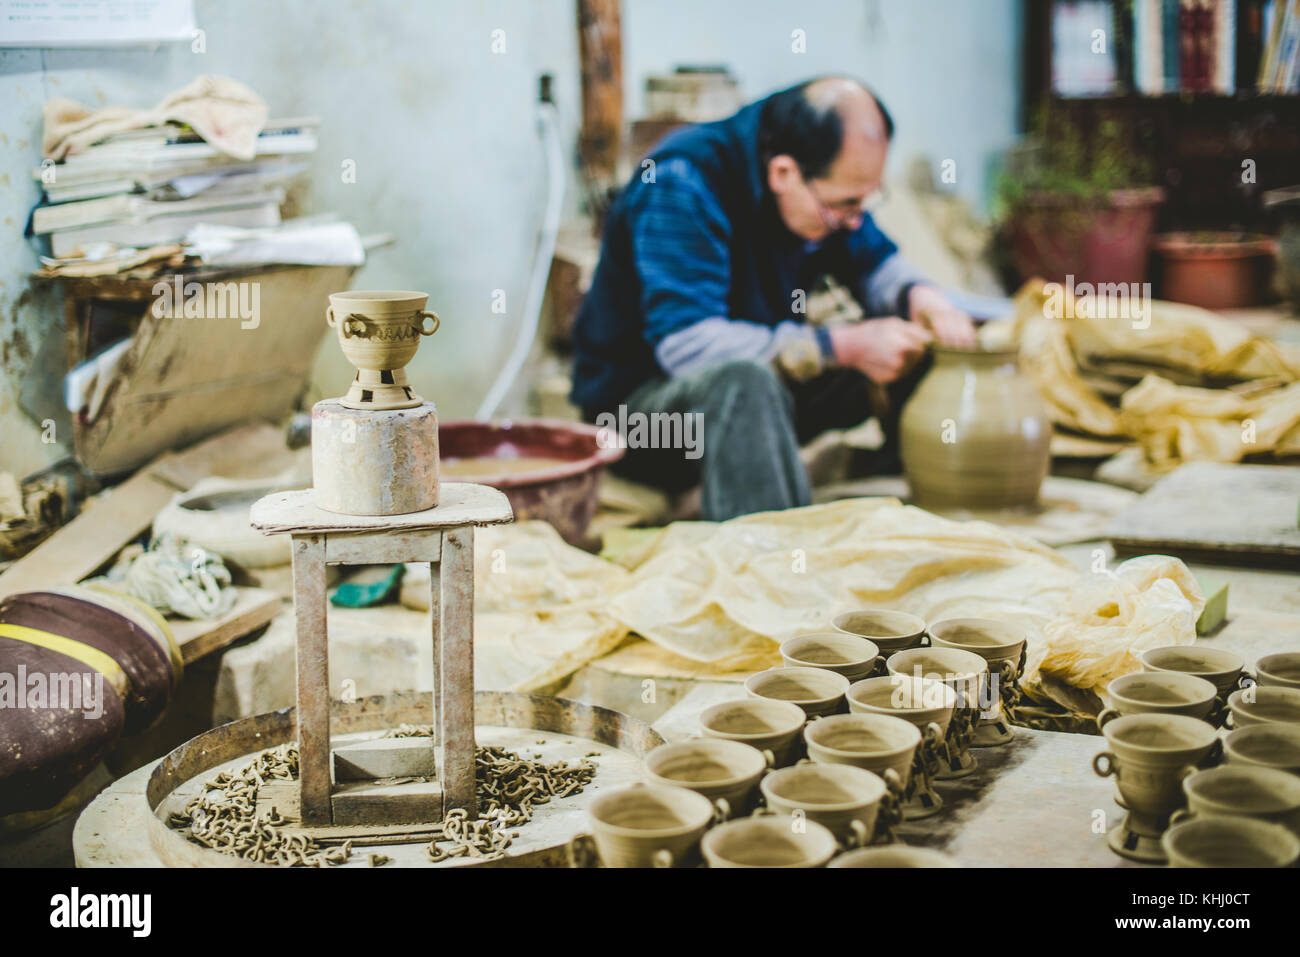 A Korean potter displays a freshly made cup while making another piece in the background in his pottery studio. Gyeongju, South Korea Stock Photo